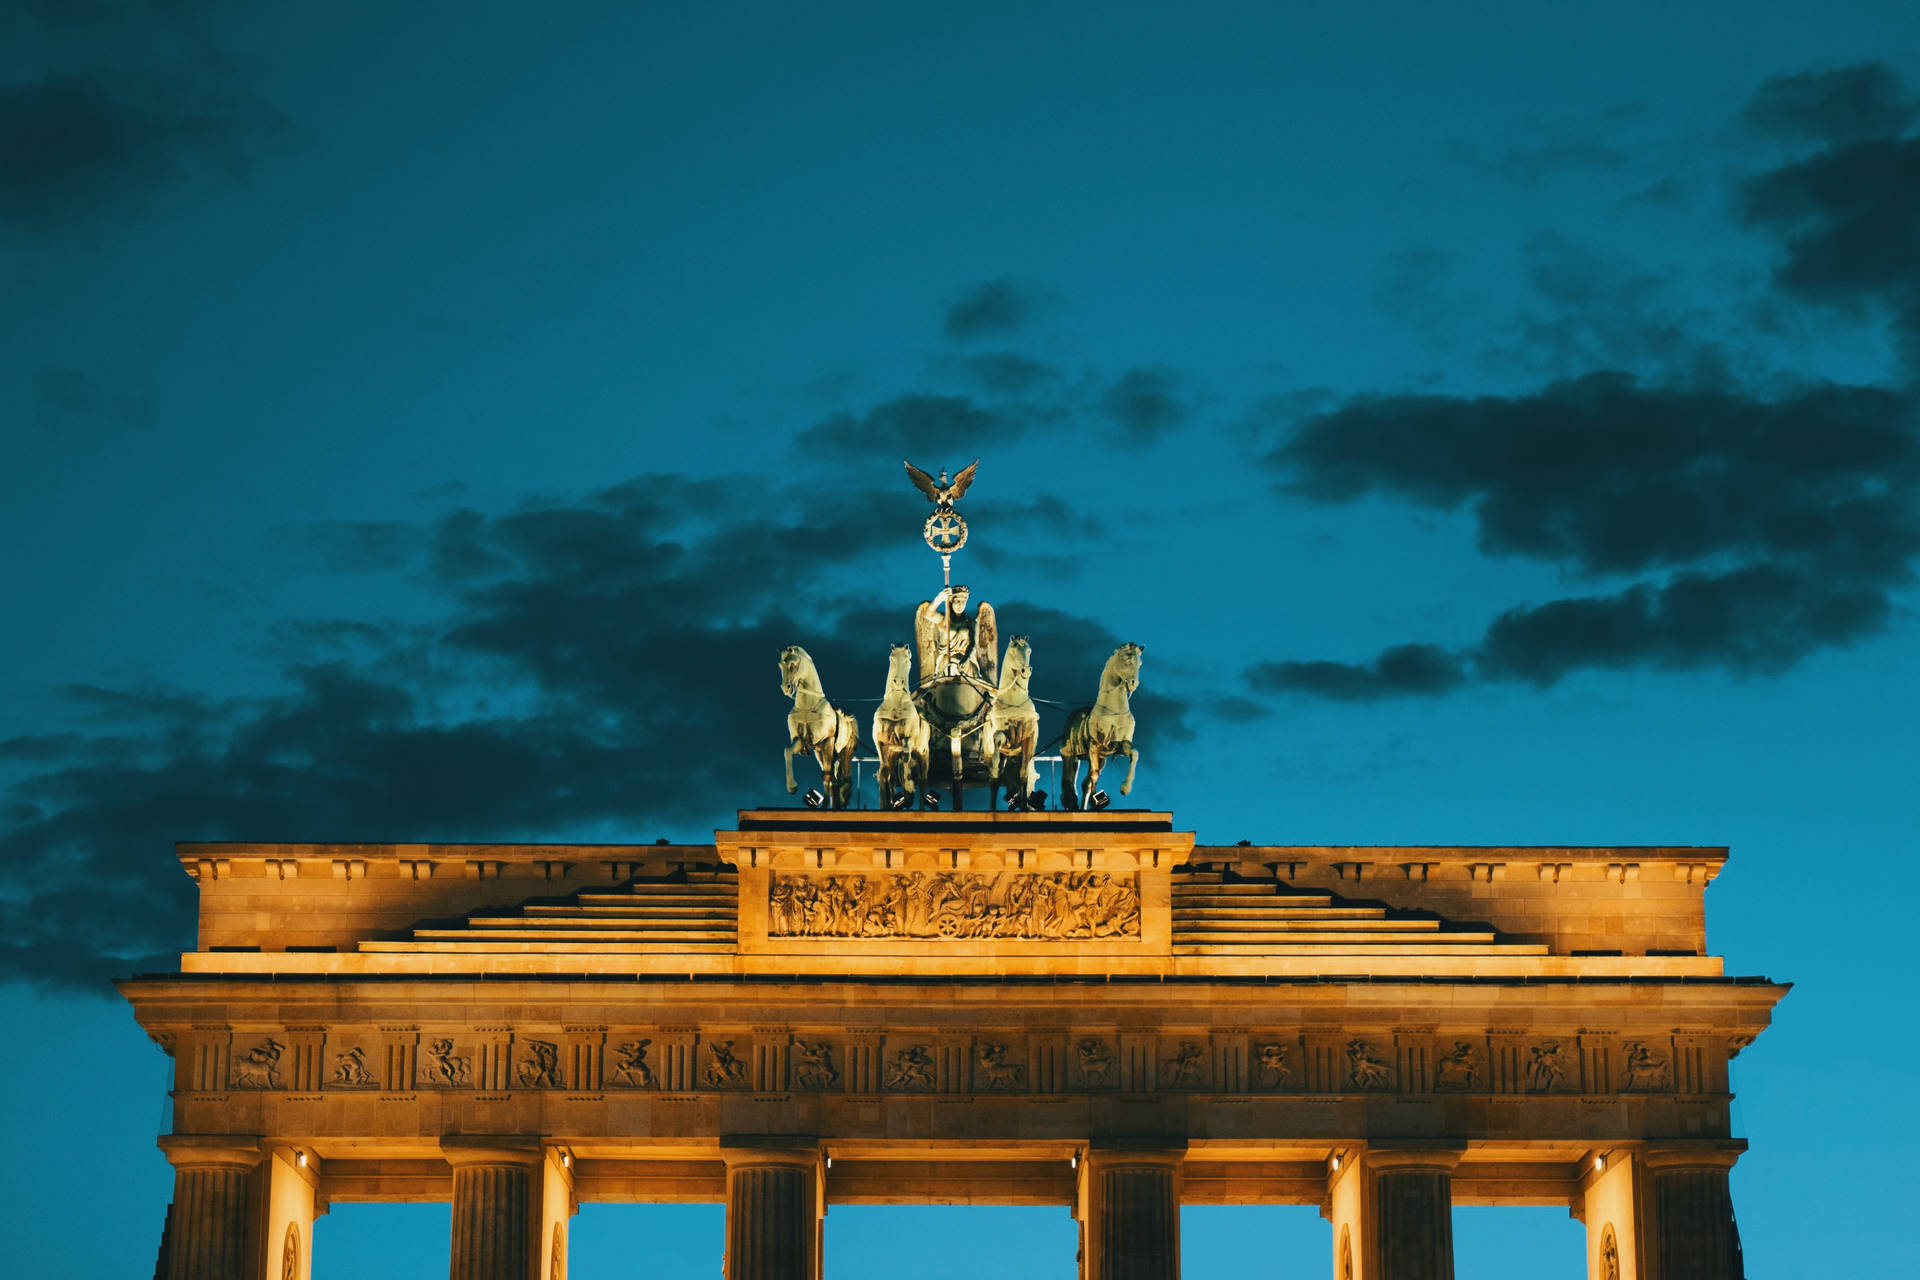 The Berlin Monument Germany Picture